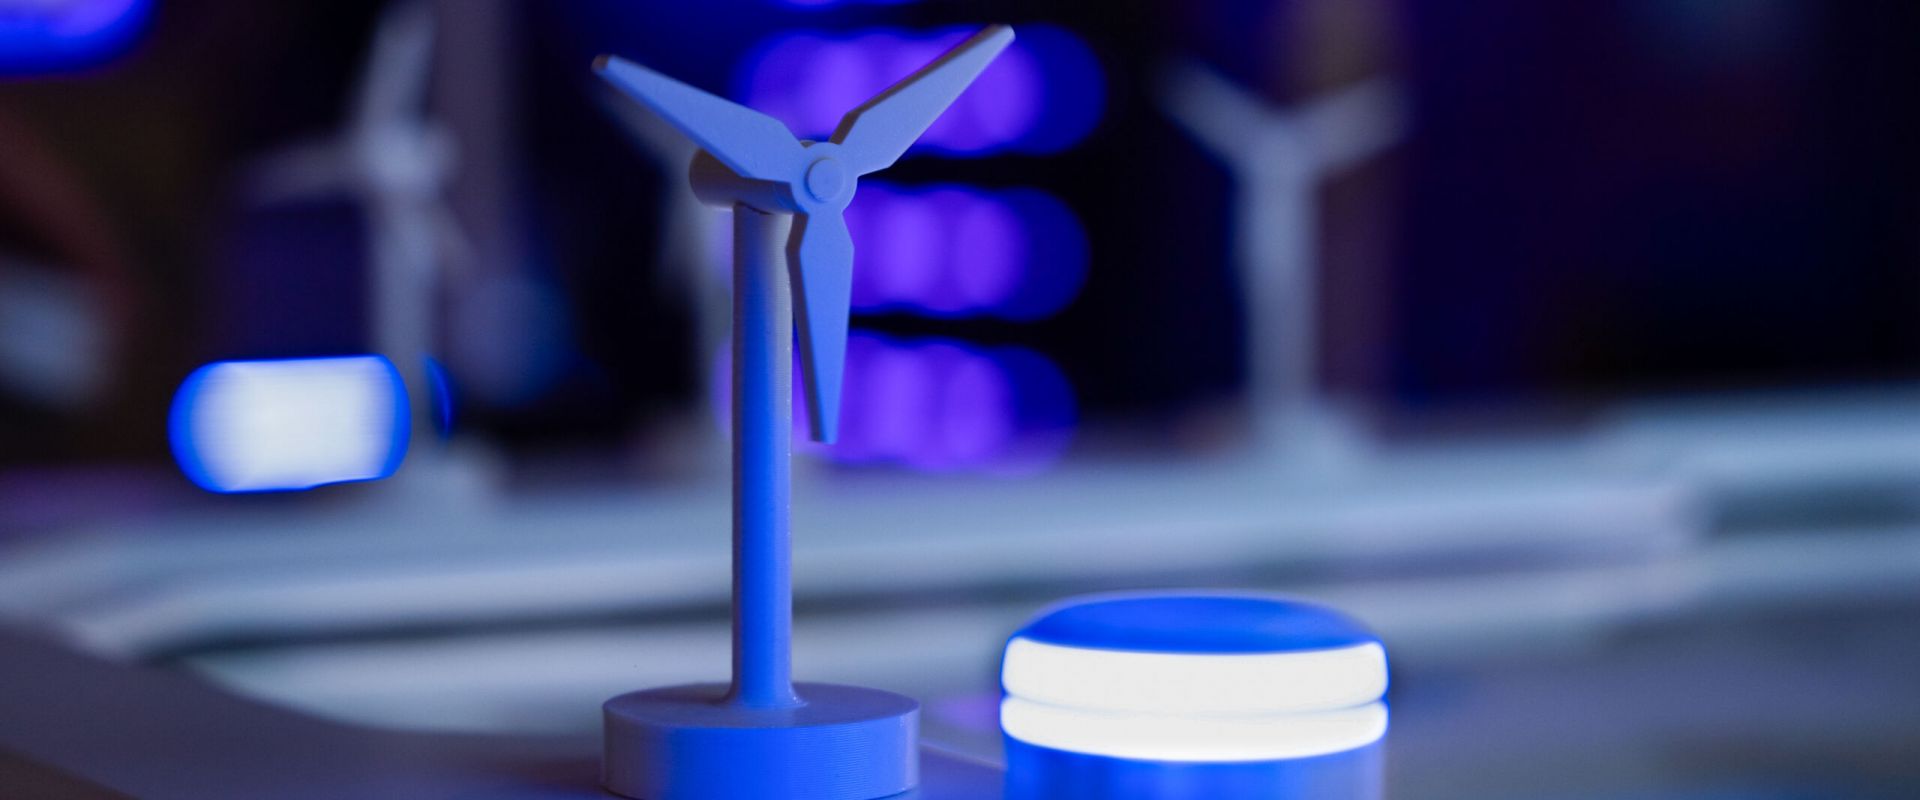 Functional object markers for multi-touch table: Wind turbine turns and energy storage lights up